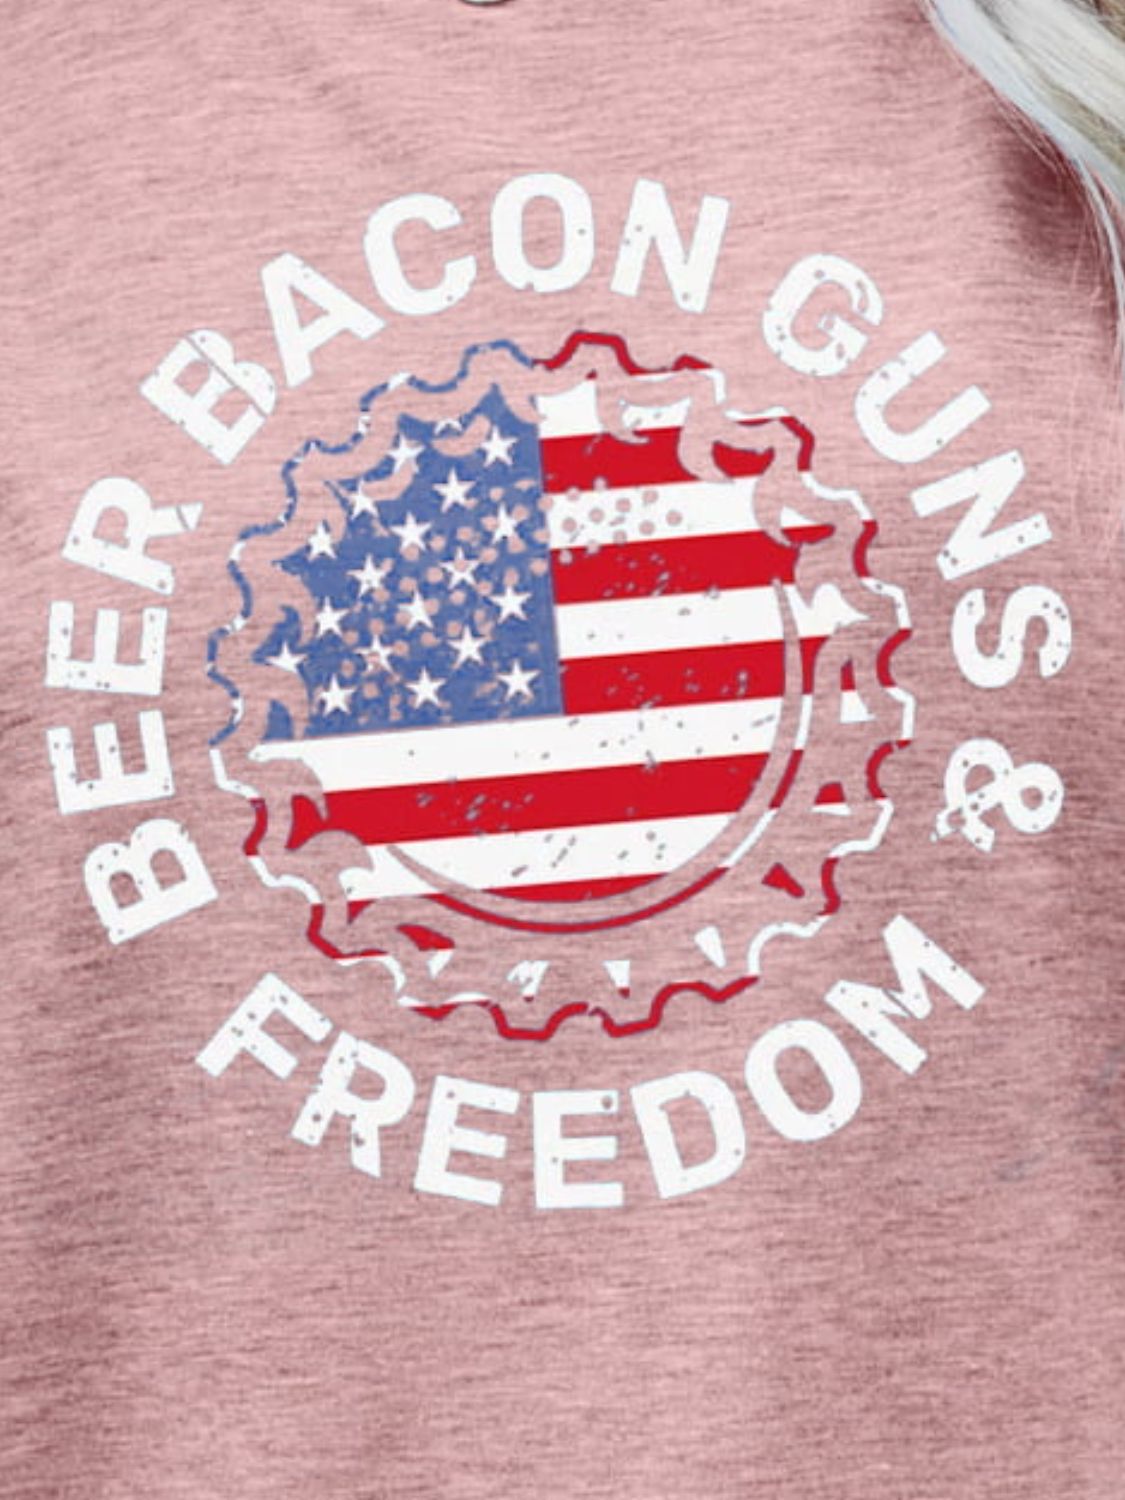 Beer Bacon Gund & Freedom US Flag Graphic Tee (5 Colors)